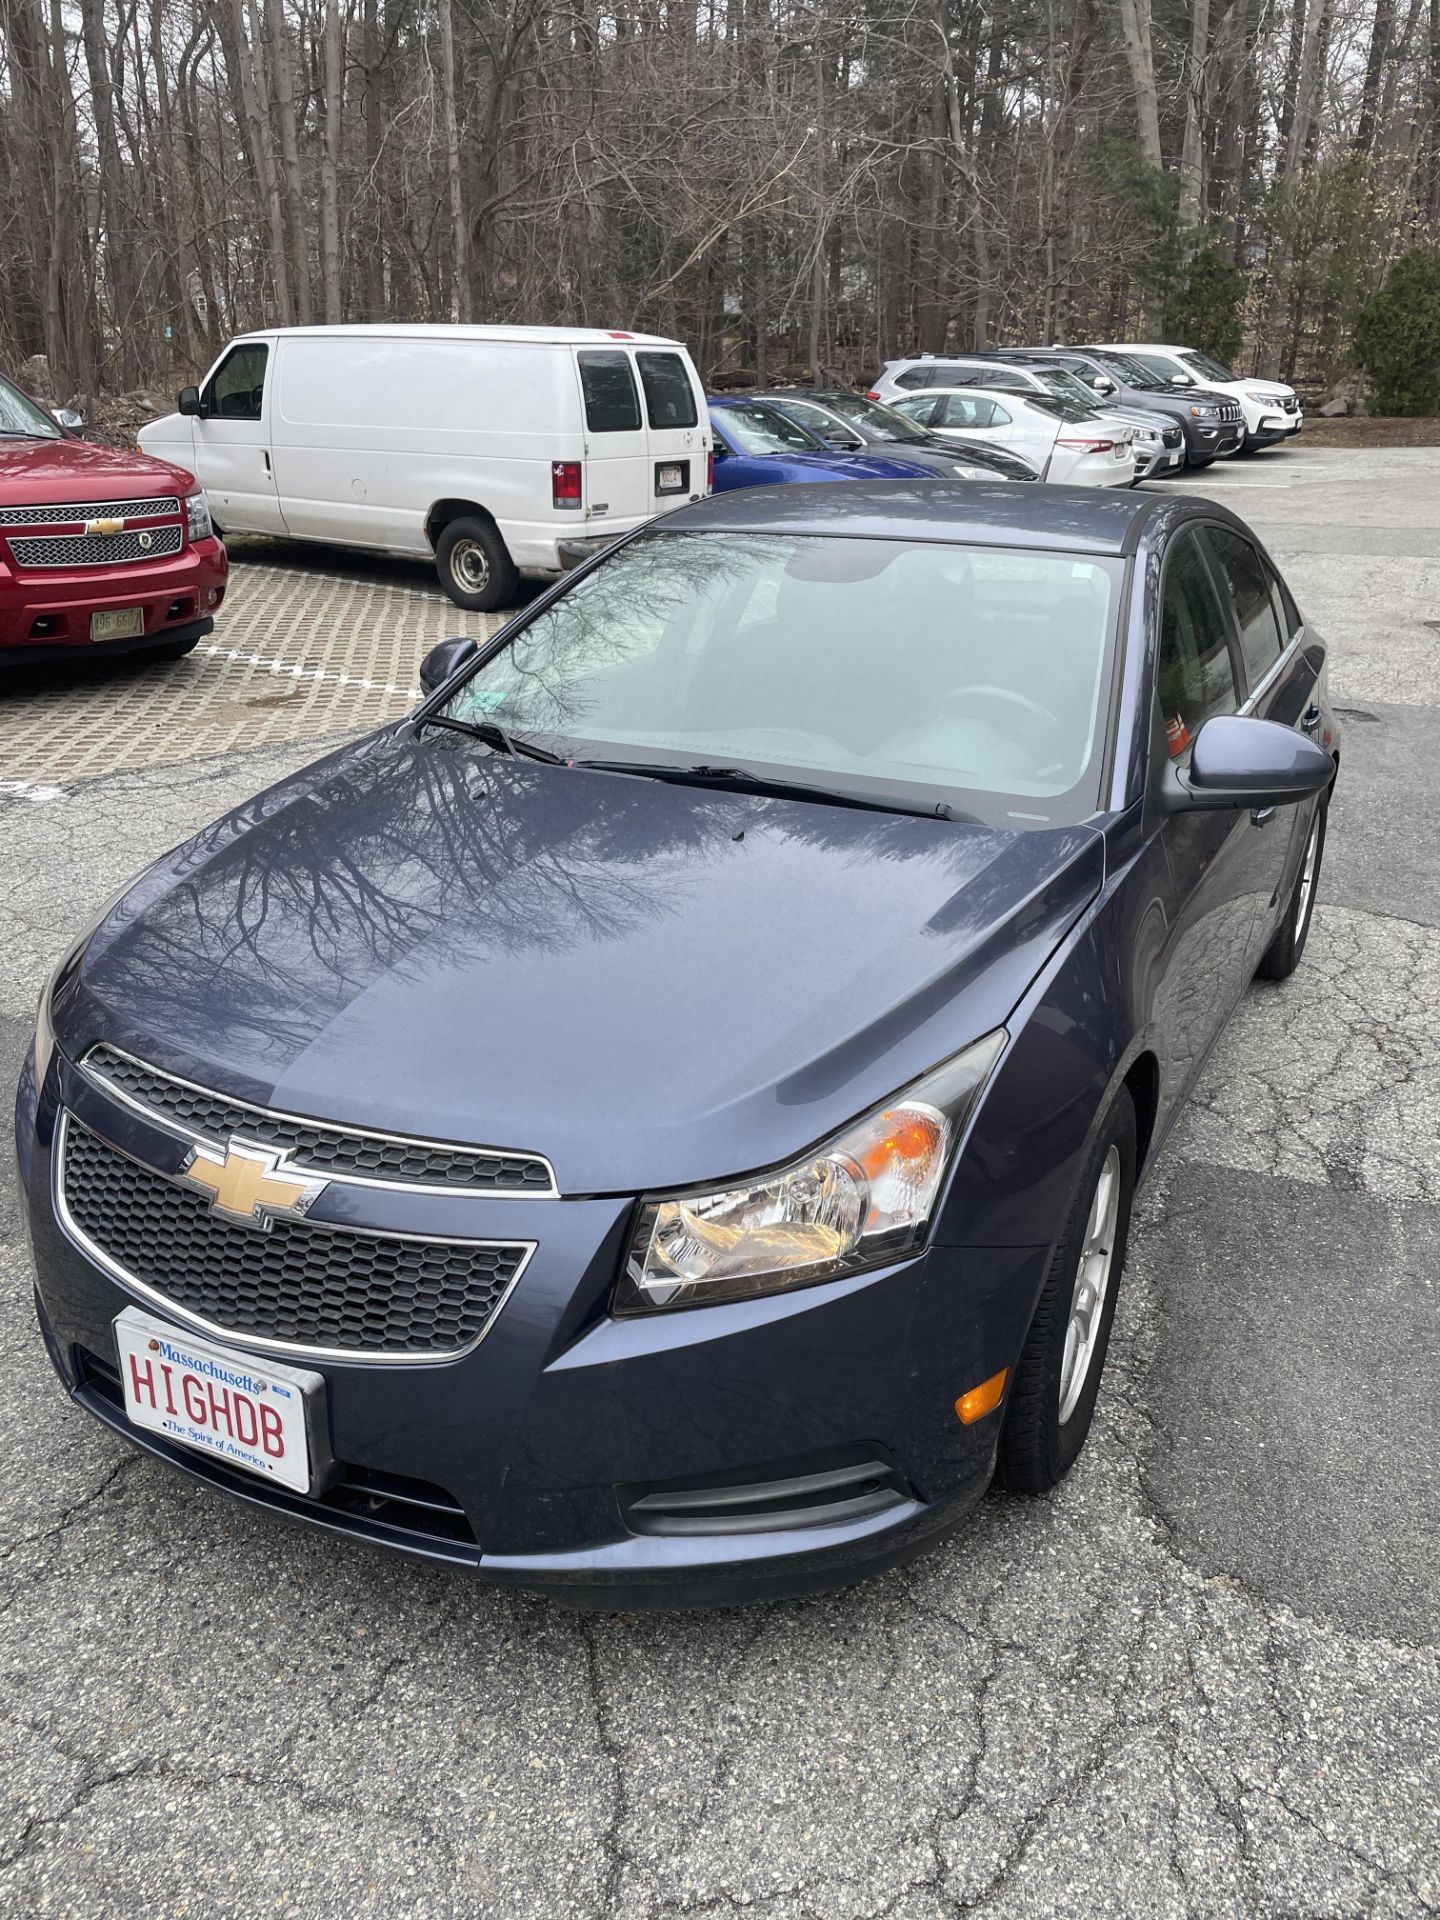 2013 Chevy Cruze Odom: 25,066, Vin:1GC1PC5SB5D7141735 (Has Ceiling Liner Issues) (THIS UNIT CAN'T BE - Image 3 of 16